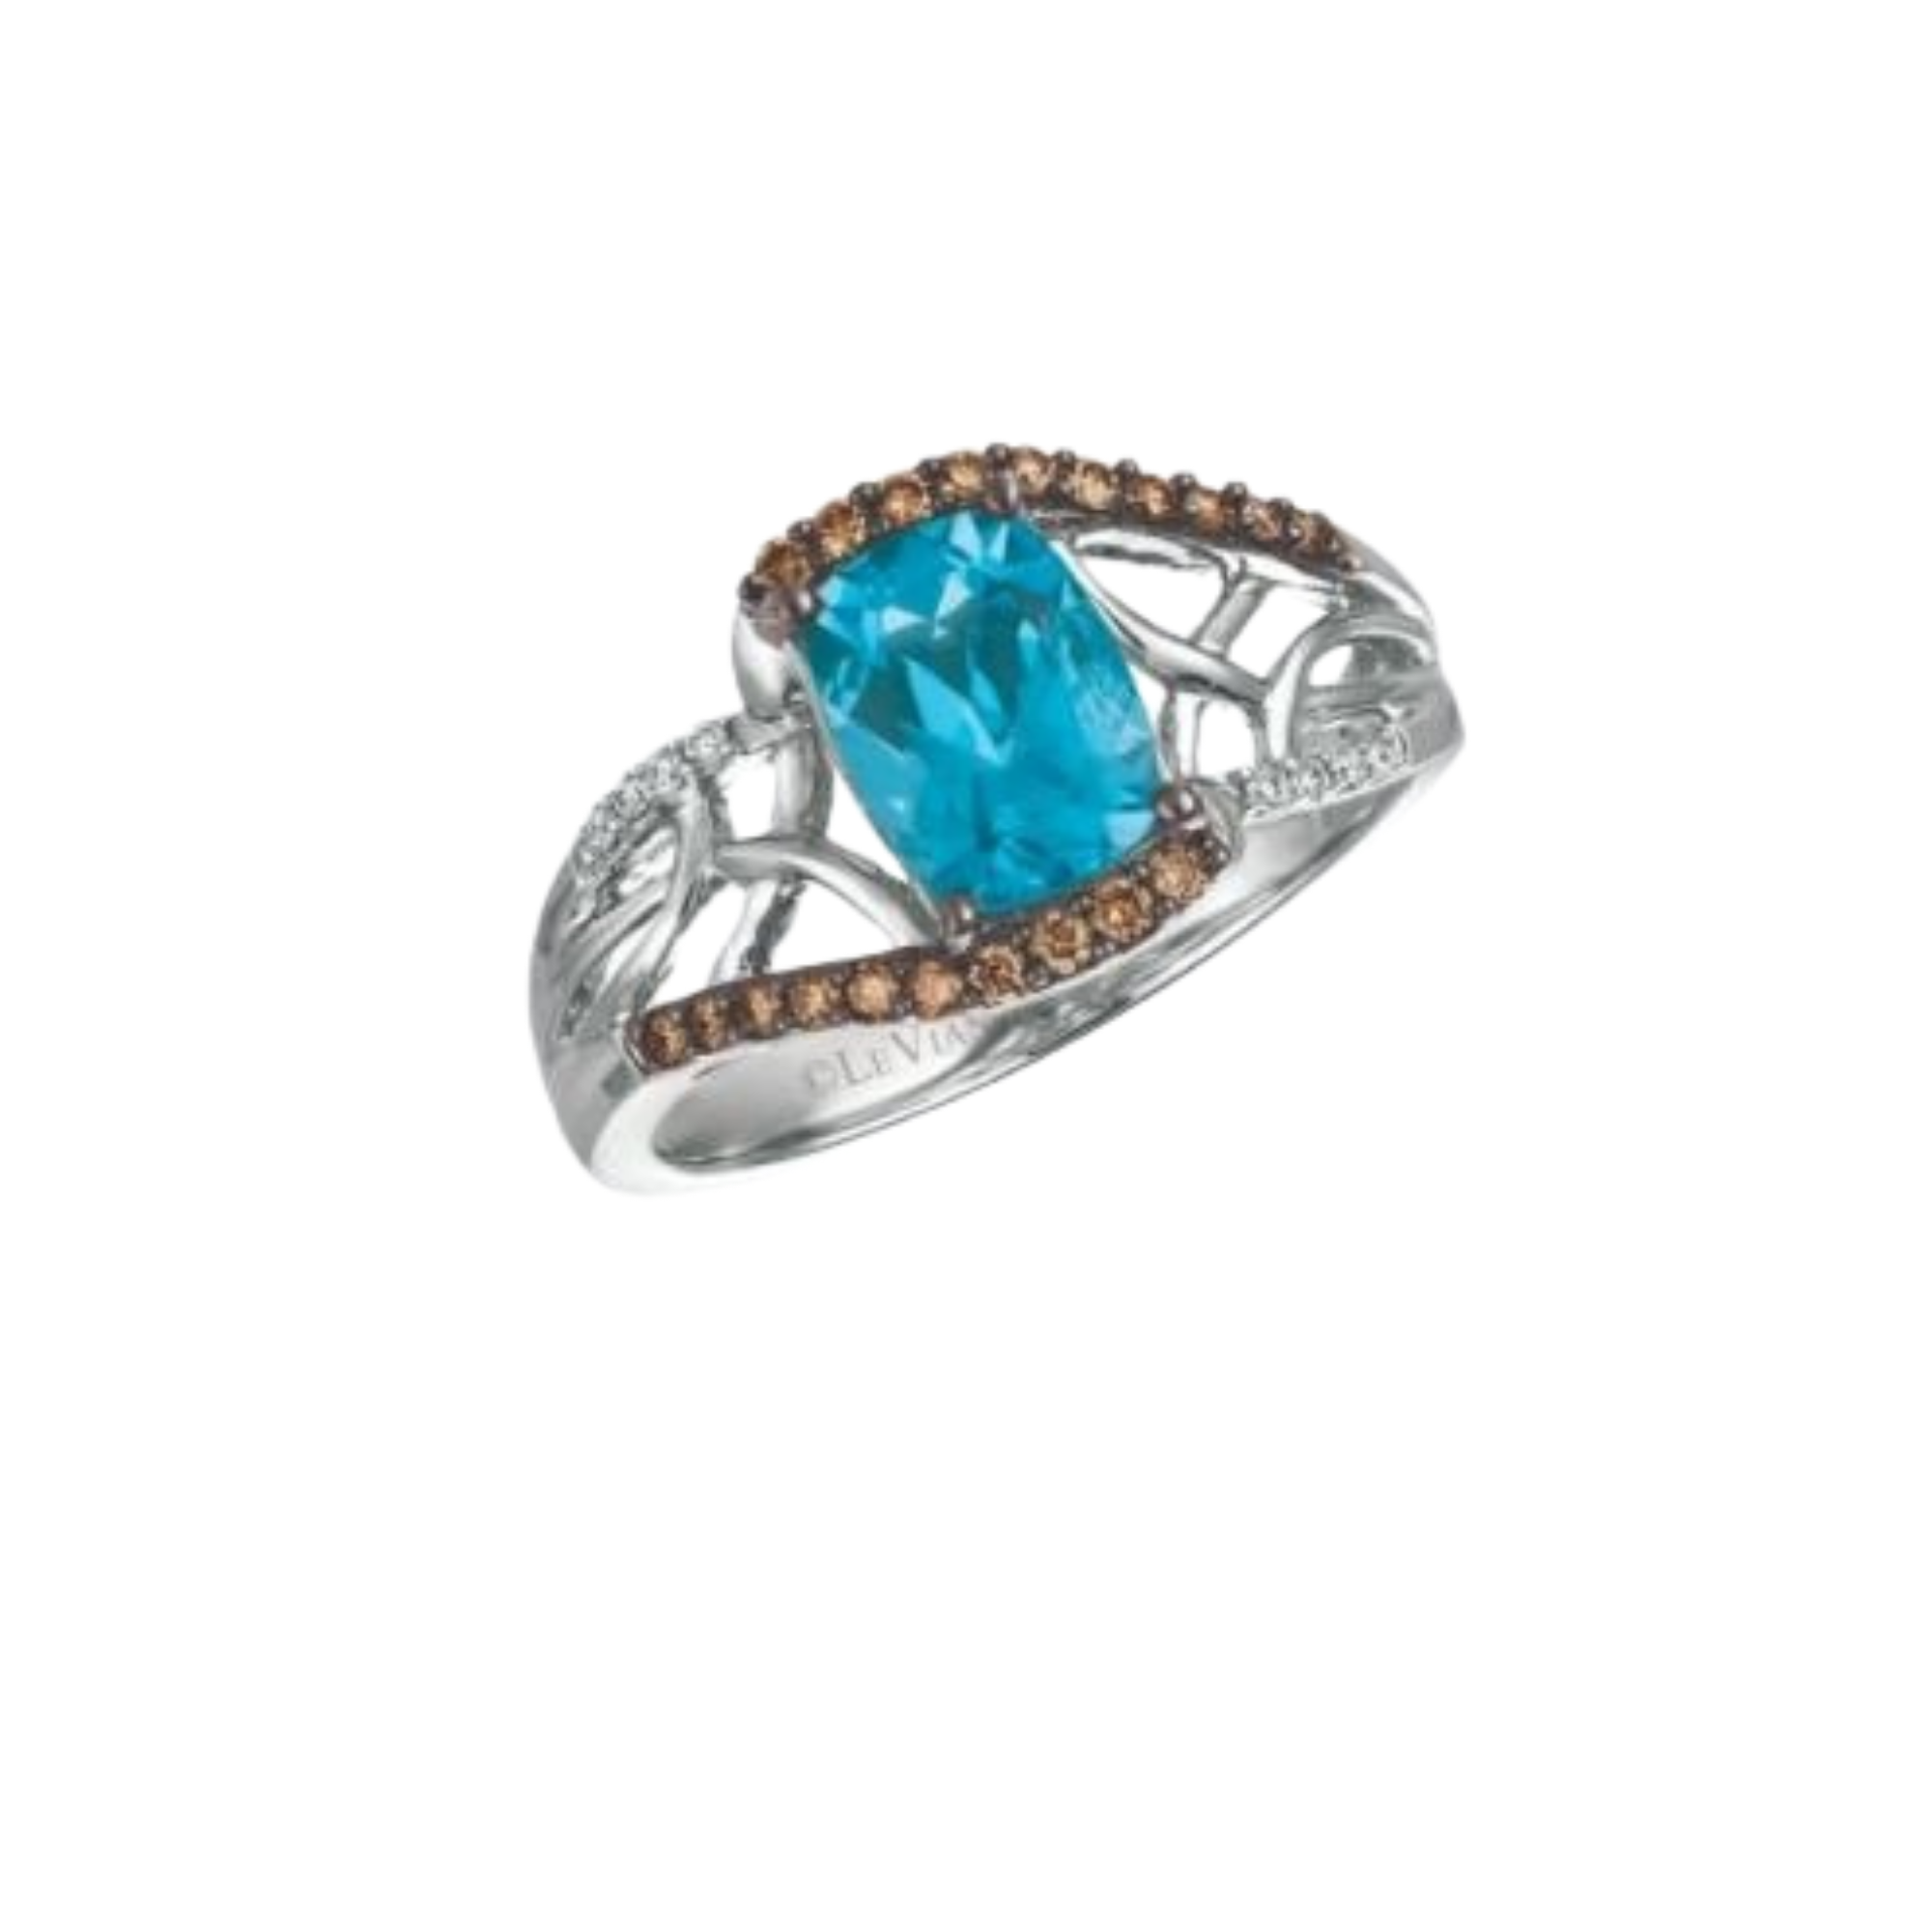 Le Vian 14k white gold and blue topaz “Berrylicious Blues” ring, $849 at Goldsmith Gallery Jewelers